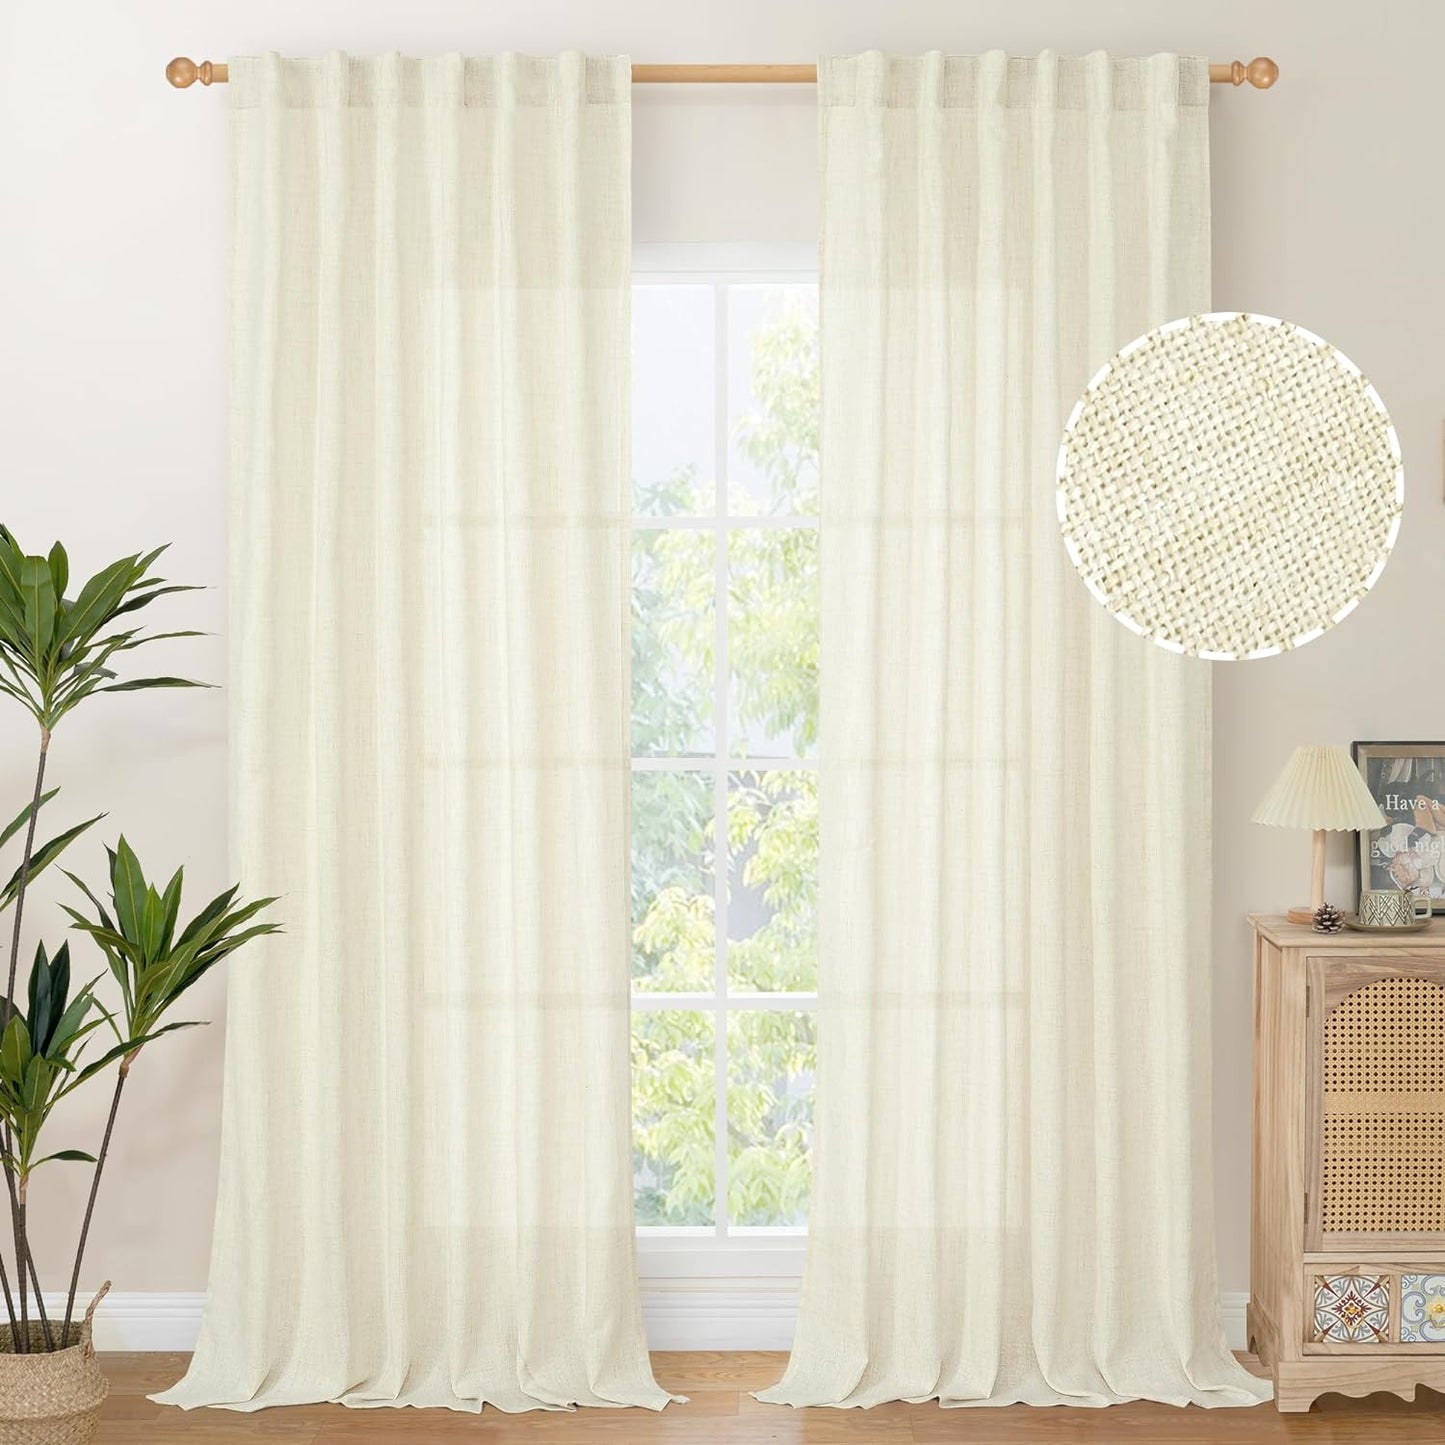 Youngstex Natural Linen Curtains 72 Inch Length 2 Panels for Living Room Light Filtering Textured Window Drapes for Bedroom Dining Office Back Tab Rod Pocket, 52 X 72 Inch  YoungsTex Cream 52W X 95L 